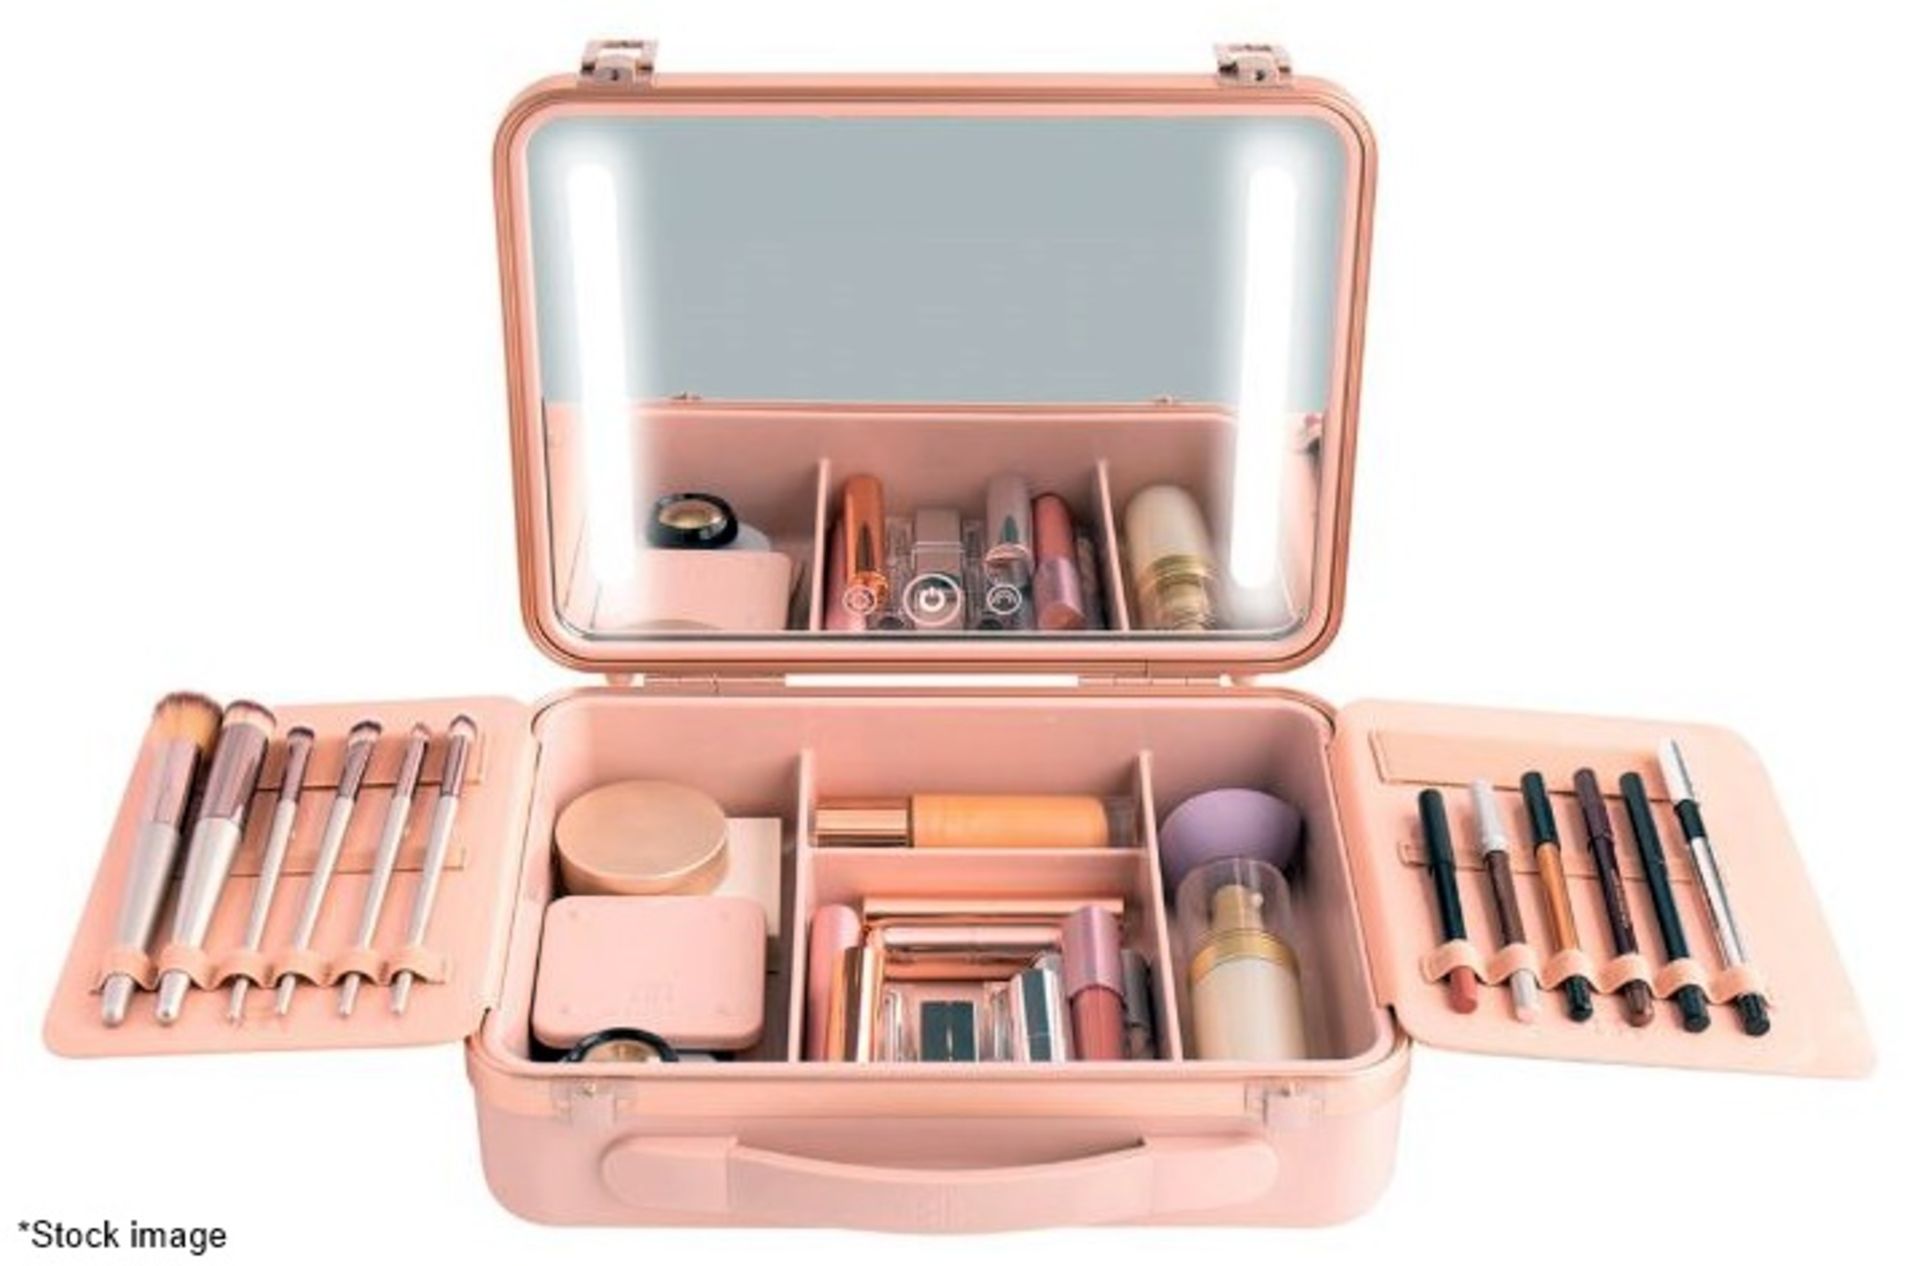 1 x BEAUTIFECT 'Beautifect Box' Make-Up Carry Case With Built-in Mirror - RRP £279.00